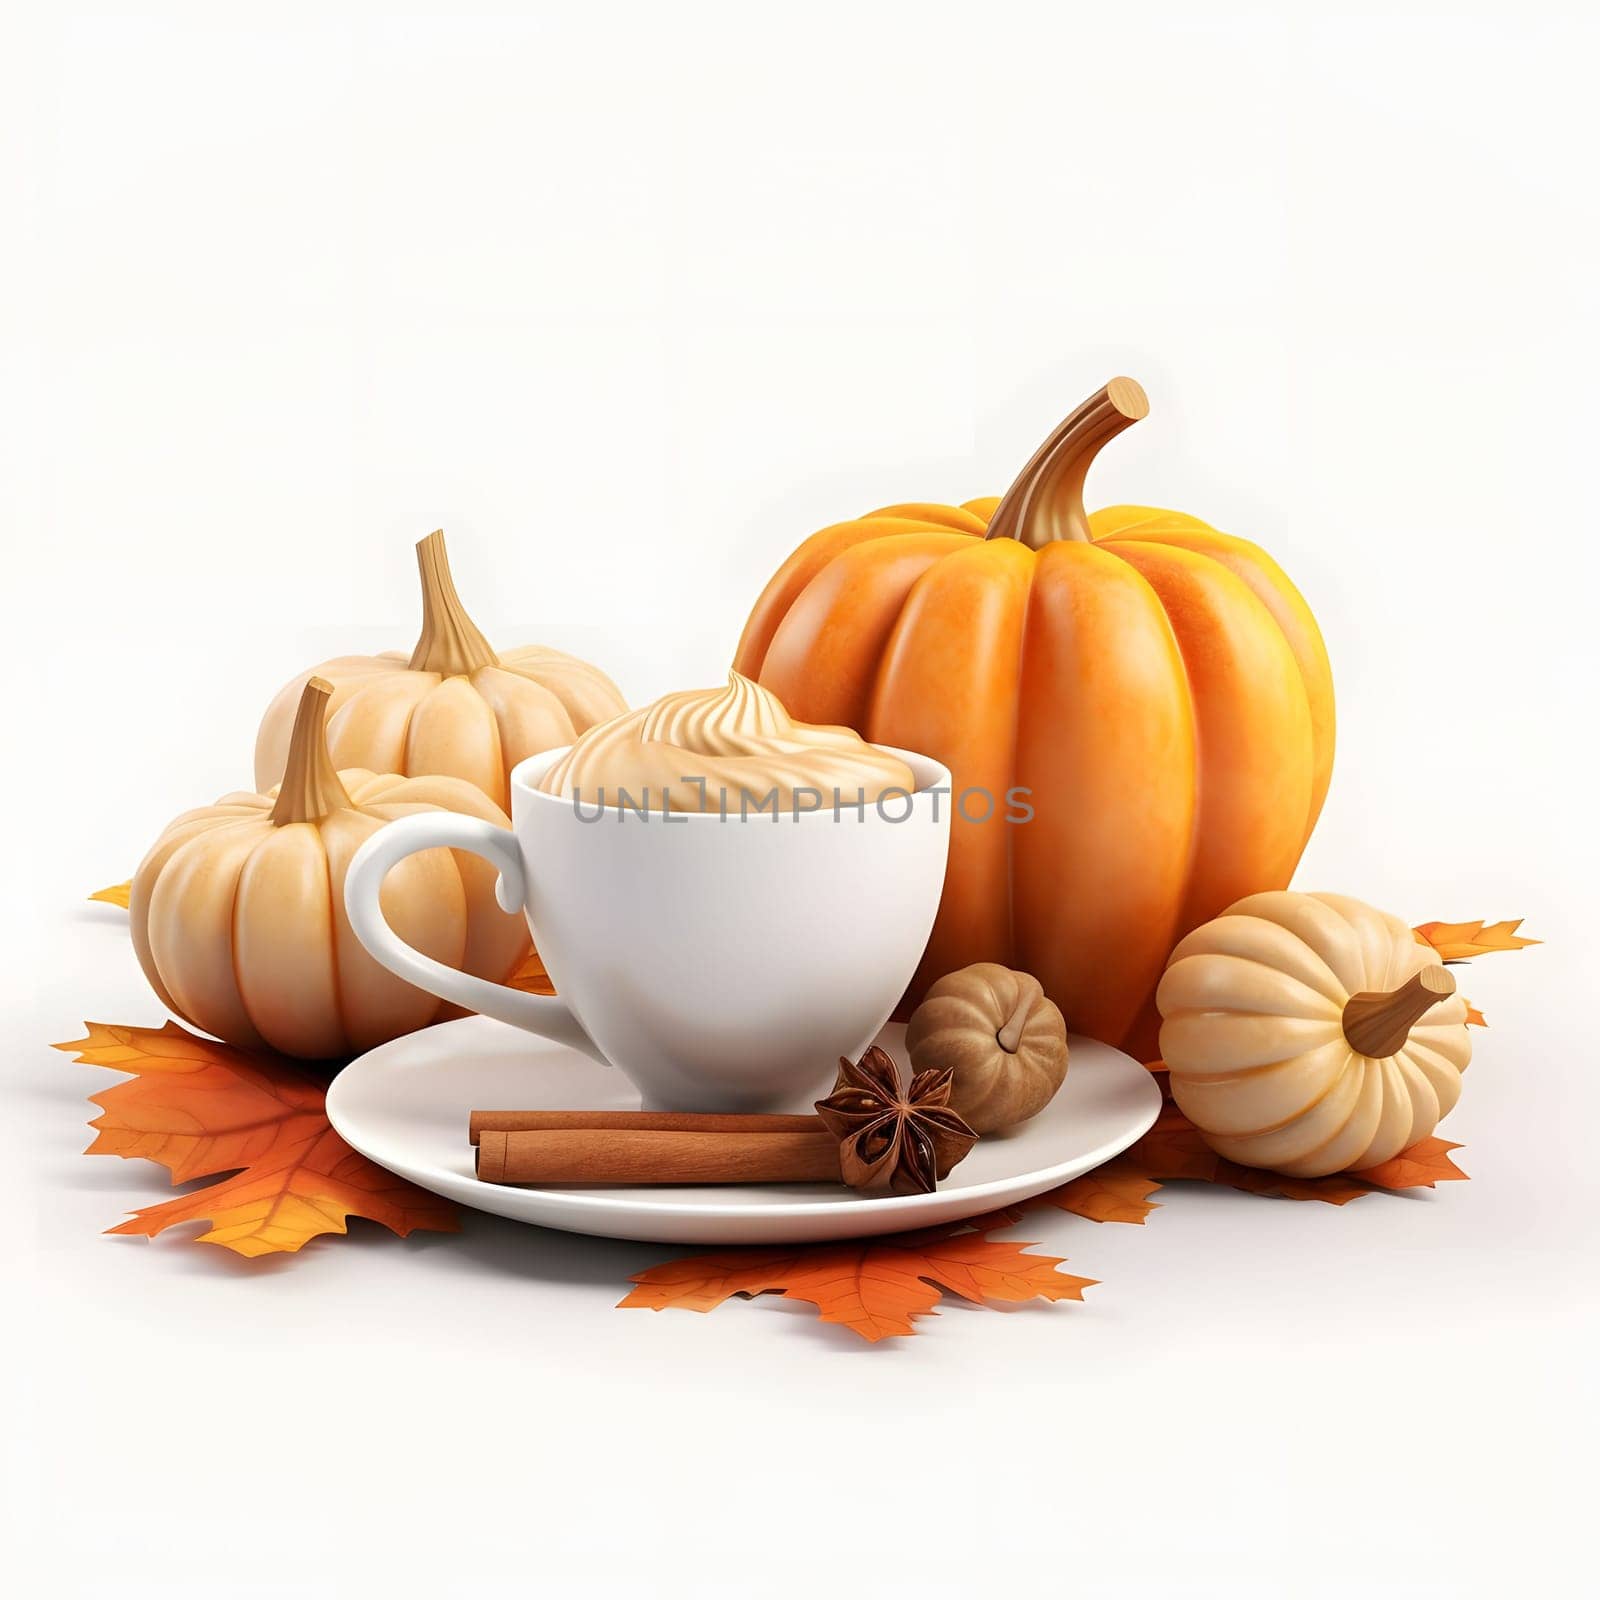 Pumpkins and a Cup of Pumpkin Mousse on a white plate around the leaves. Pumpkin as a dish of thanksgiving for the harvest, picture on a white isolated background. Atmosphere of joy and celebration.